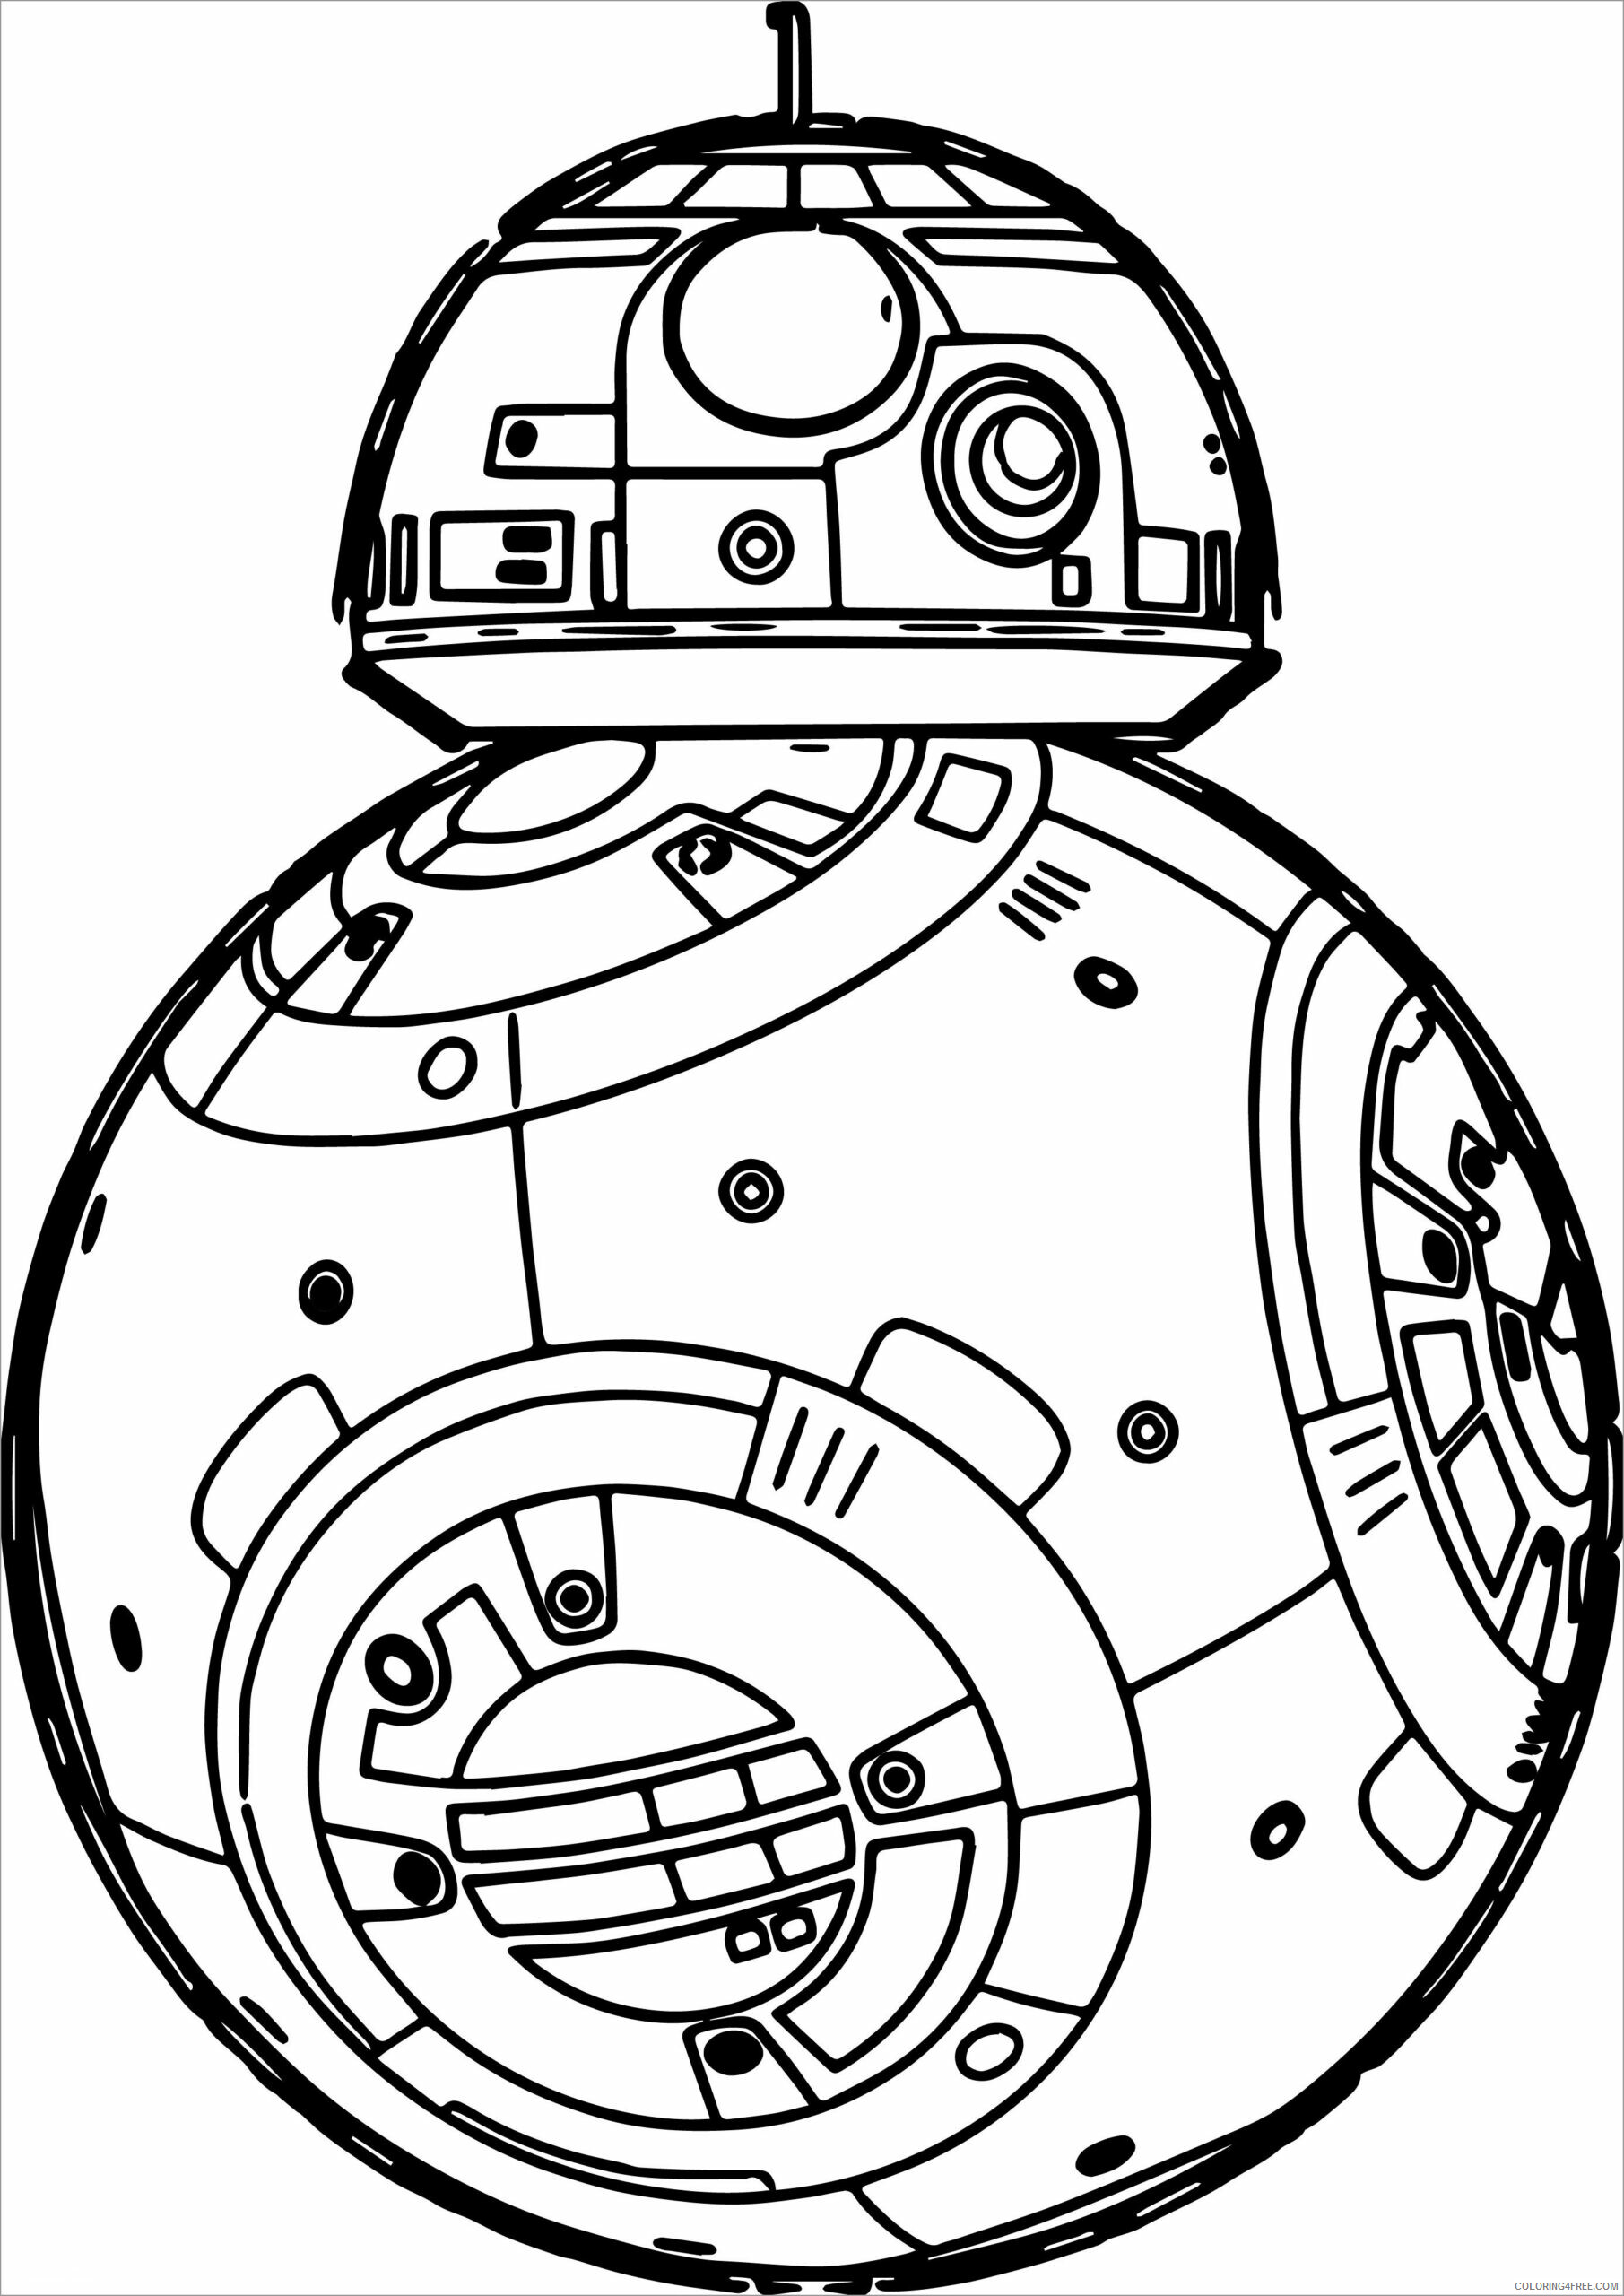 Star Wars Coloring Pages TV Film the force awakens bb 8 robot 2020 08036 Coloring4free